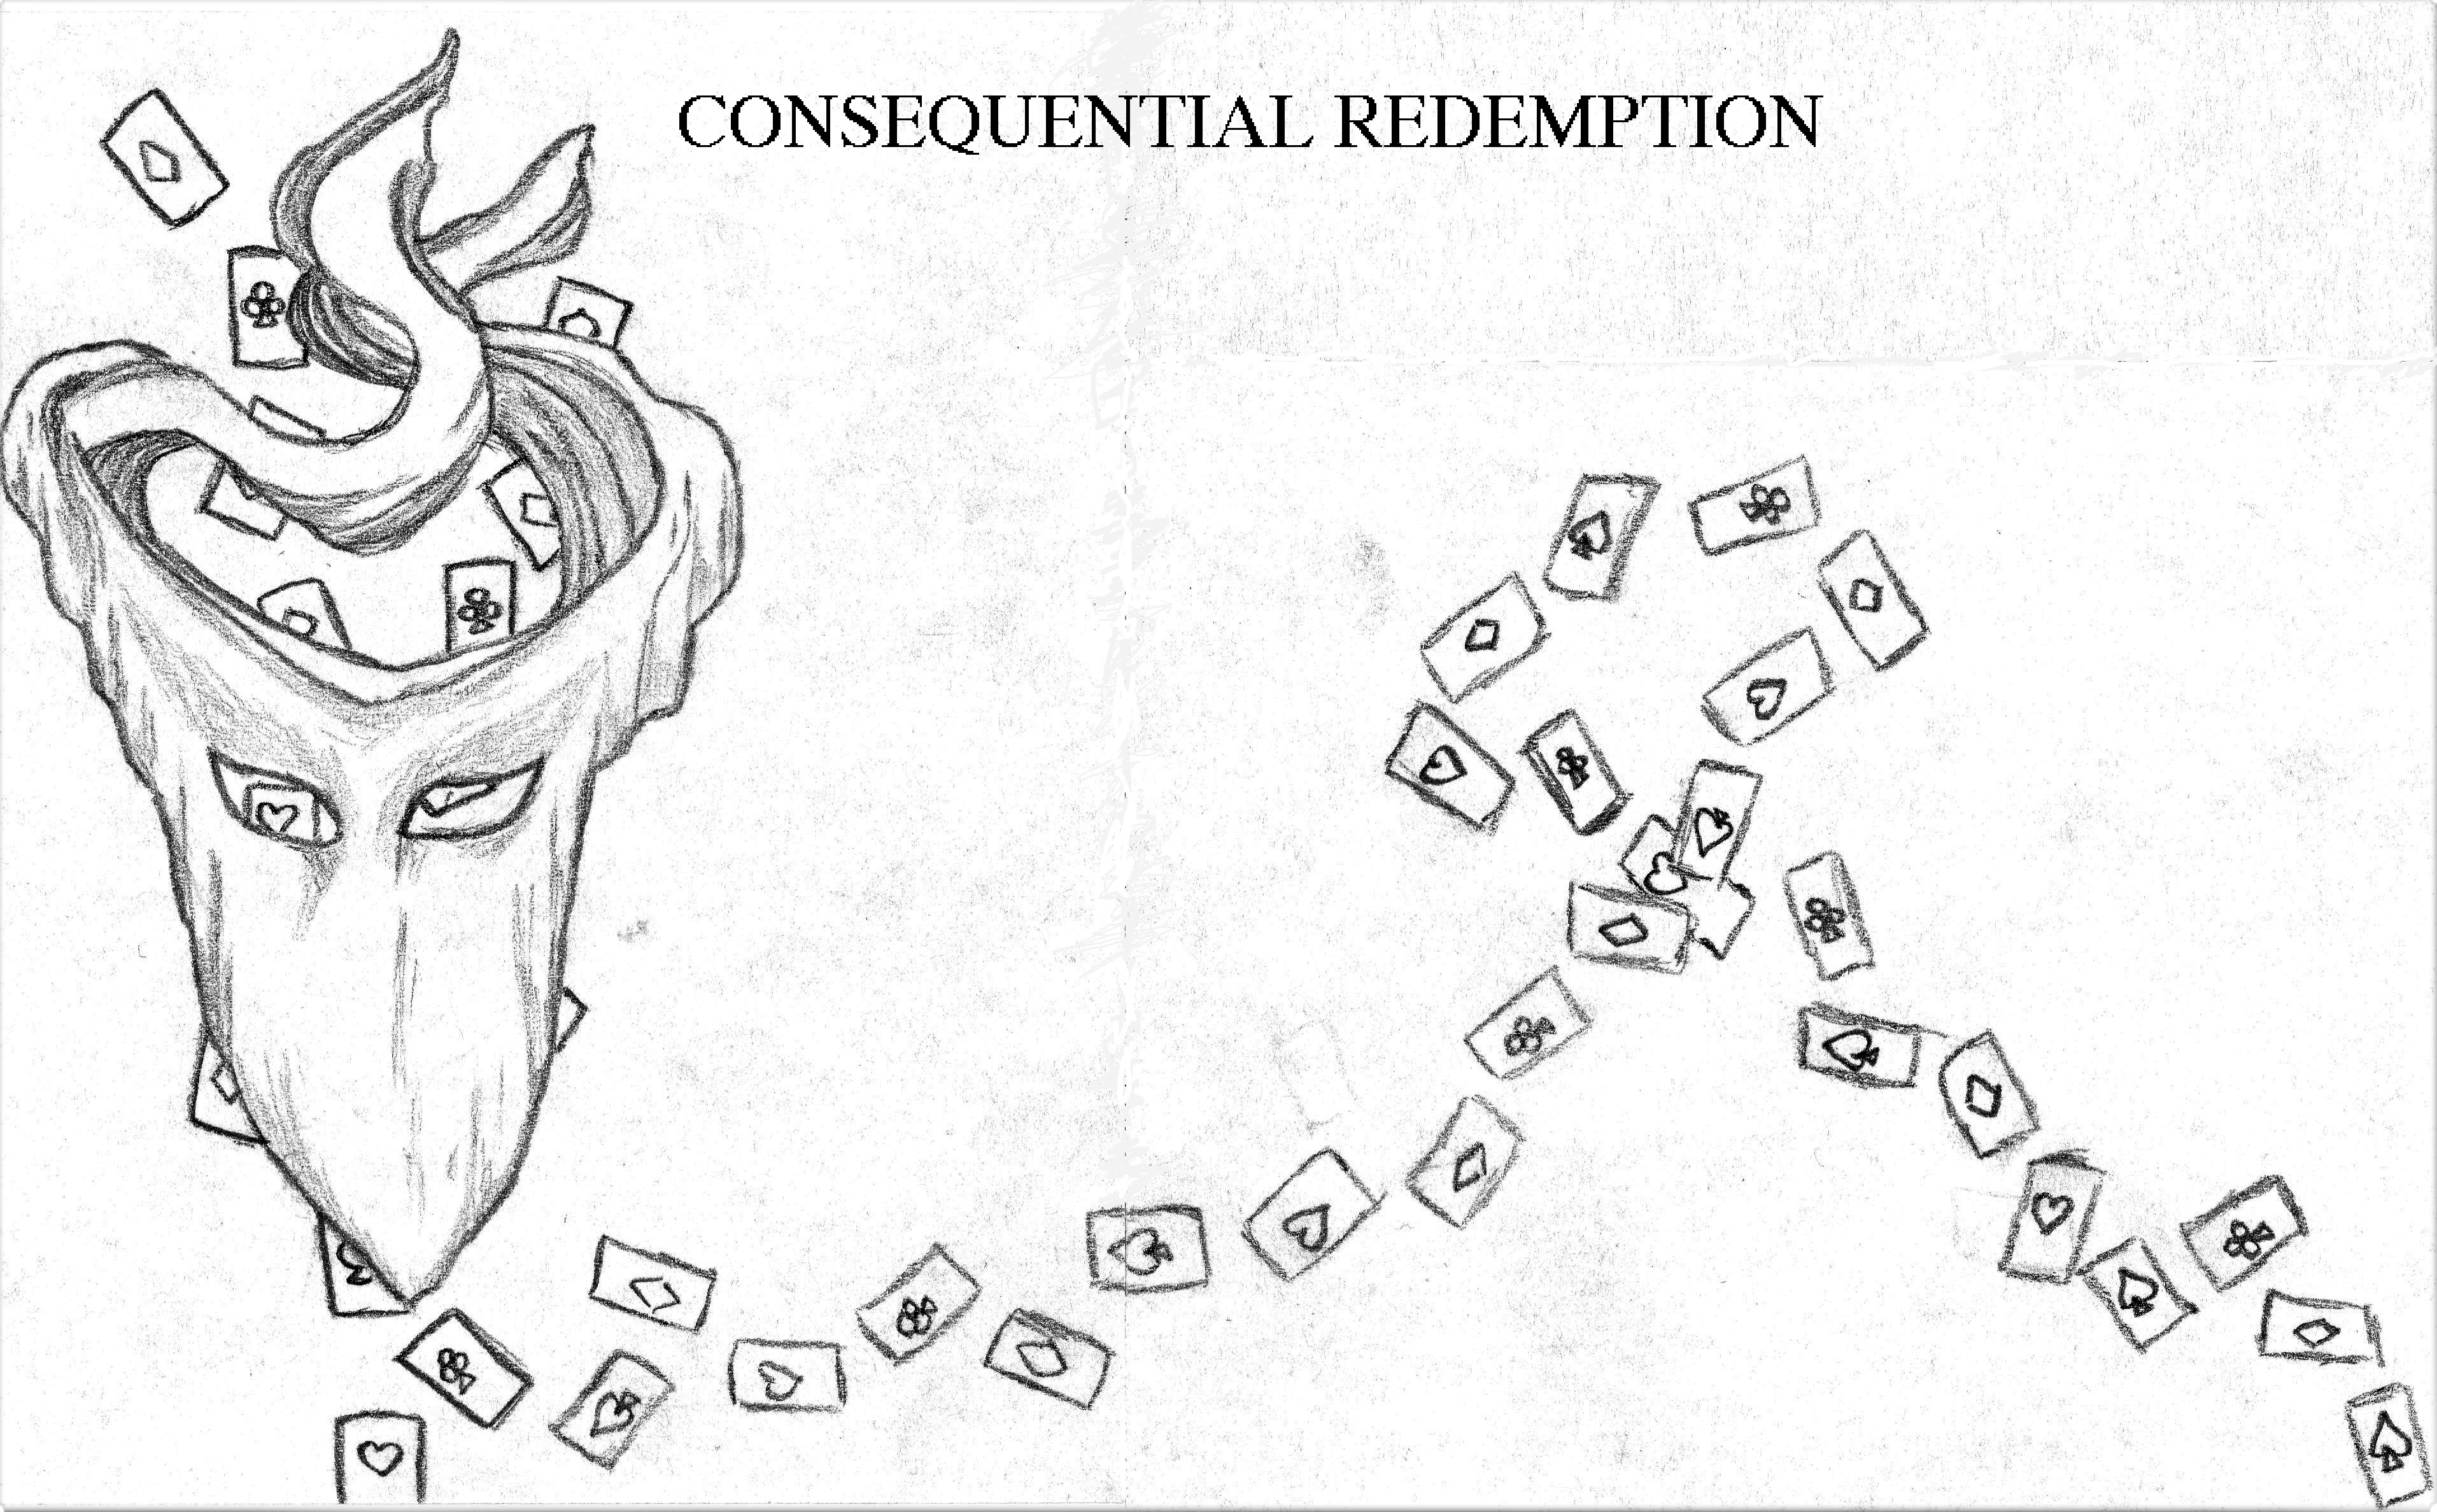 Consequential Redemption